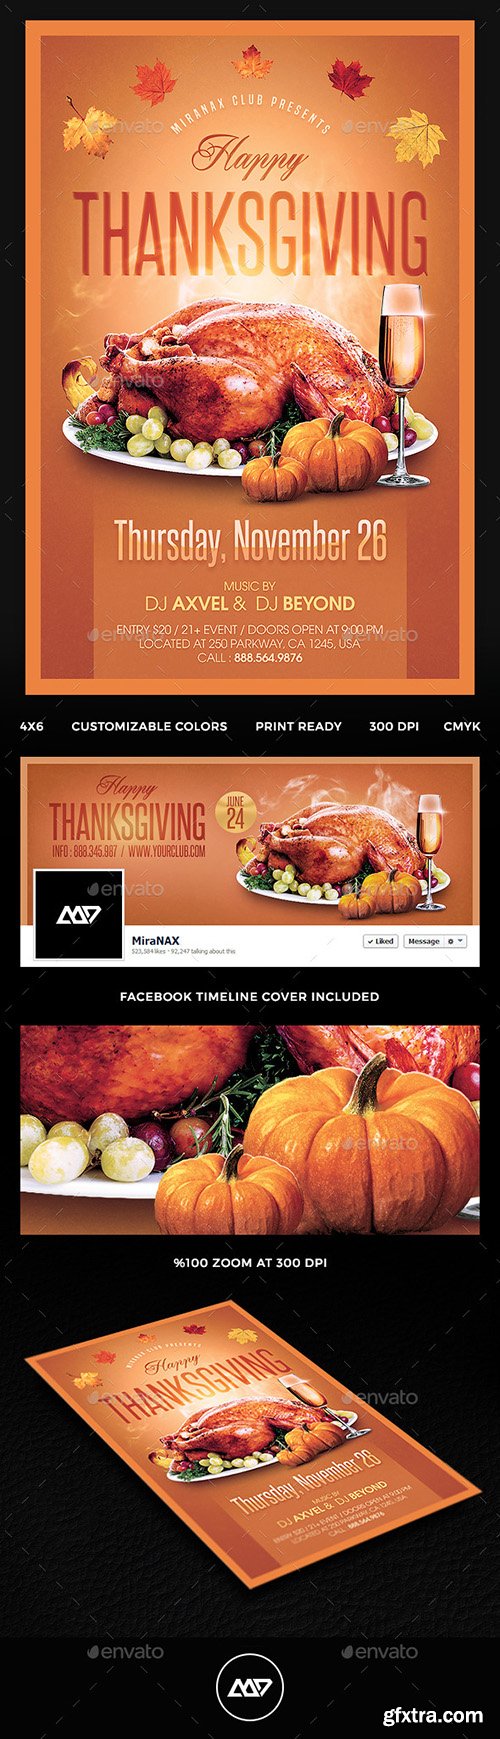 Graphicriver Thanksgiving Flyer 13477670